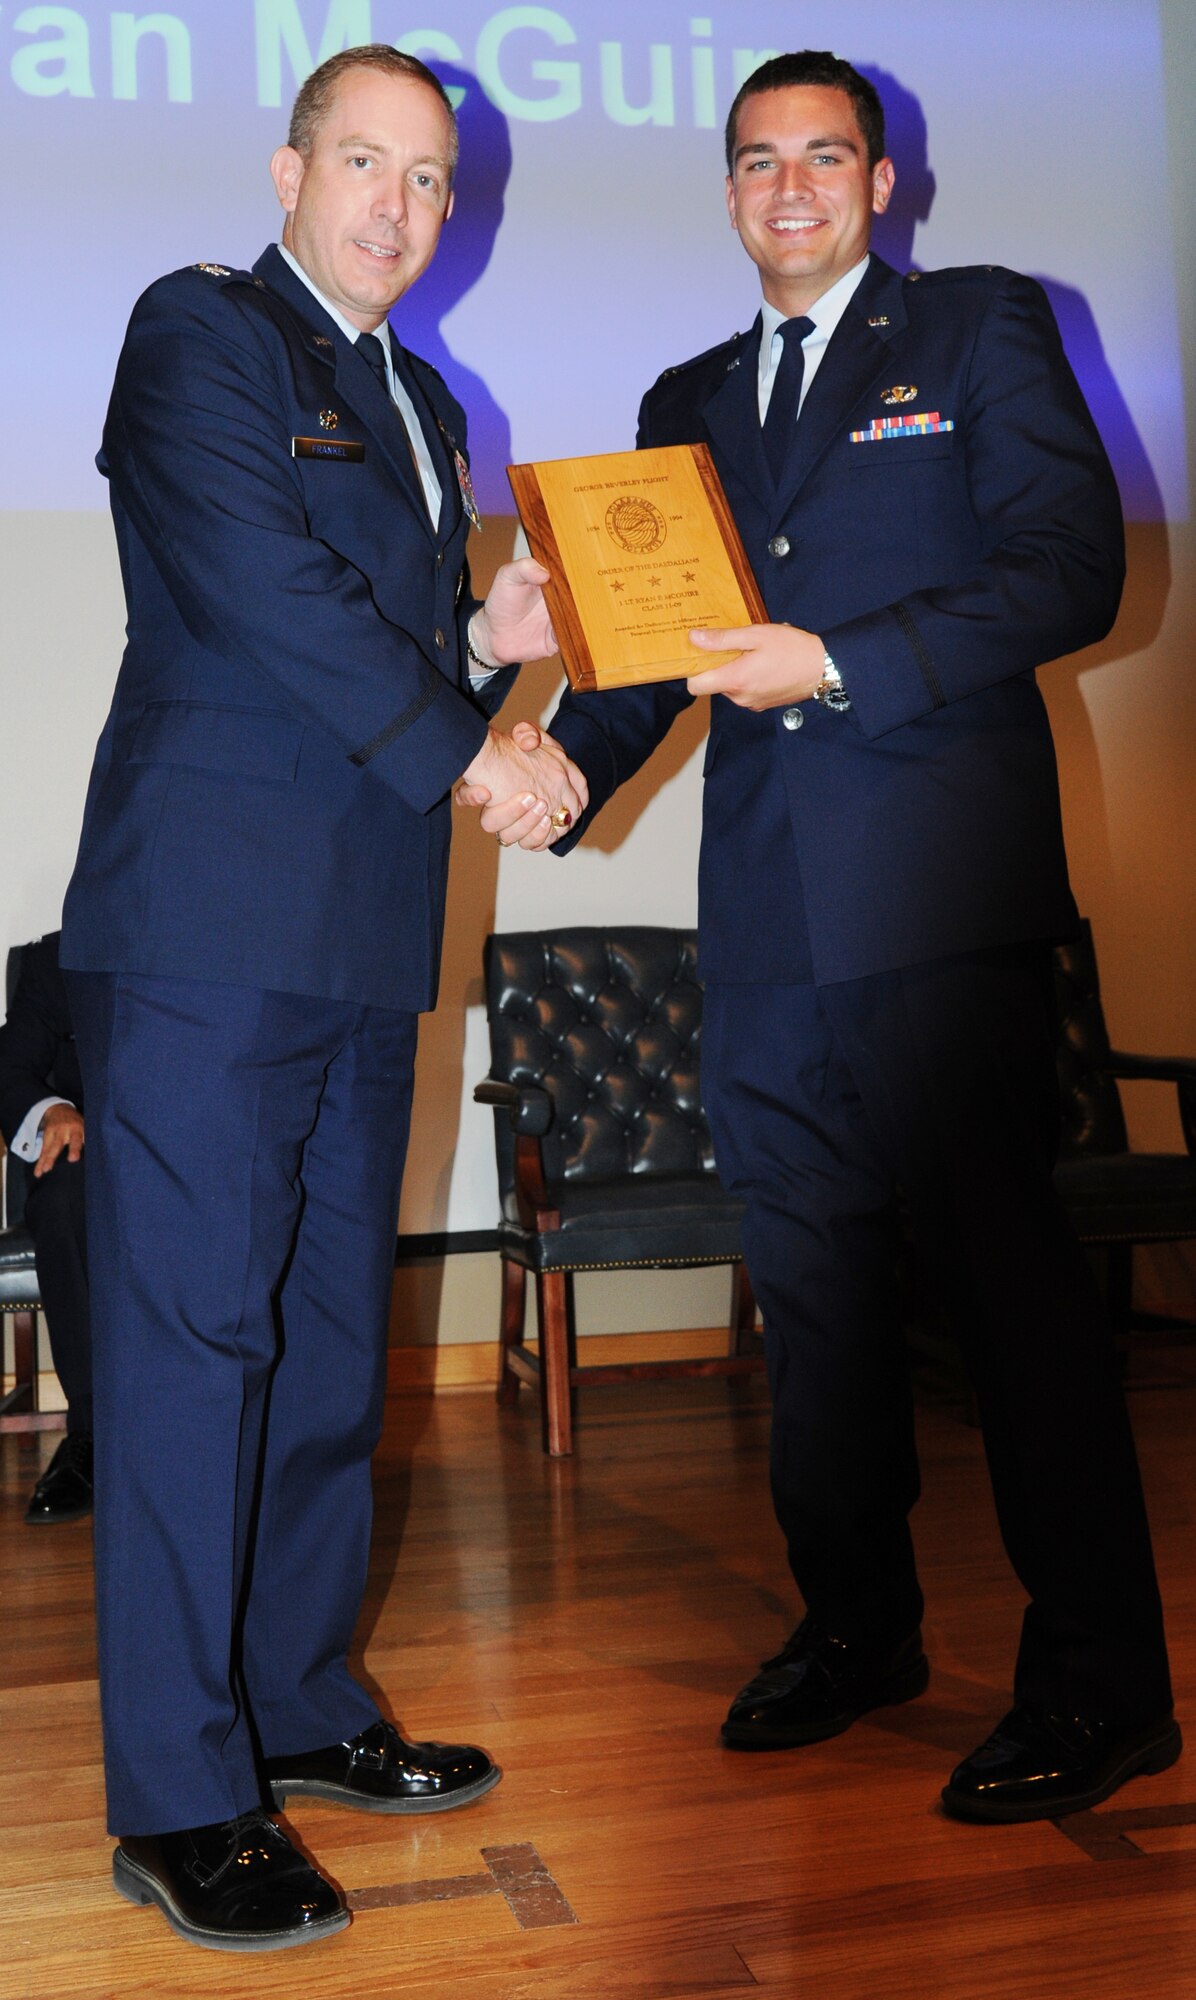 LAUGHLIN AIR FORCE BASE, Texas – First Lt. Ryan McGuire, 47th Operations Support Squadron, accepts the Daedalian Award from Col. Michael Frankel, 47th Flying Training Wing commander, during the graduation of Specialized Undergraduate Pilot Training class 11-09 at Laughlin’s Anderson Hall May 20. Lieutenant McGuire became the first person in the history of the Air Force to graduate pilot training as an amputee. (U.S. Air Force photo by Airman 1st Class Blake Mize)